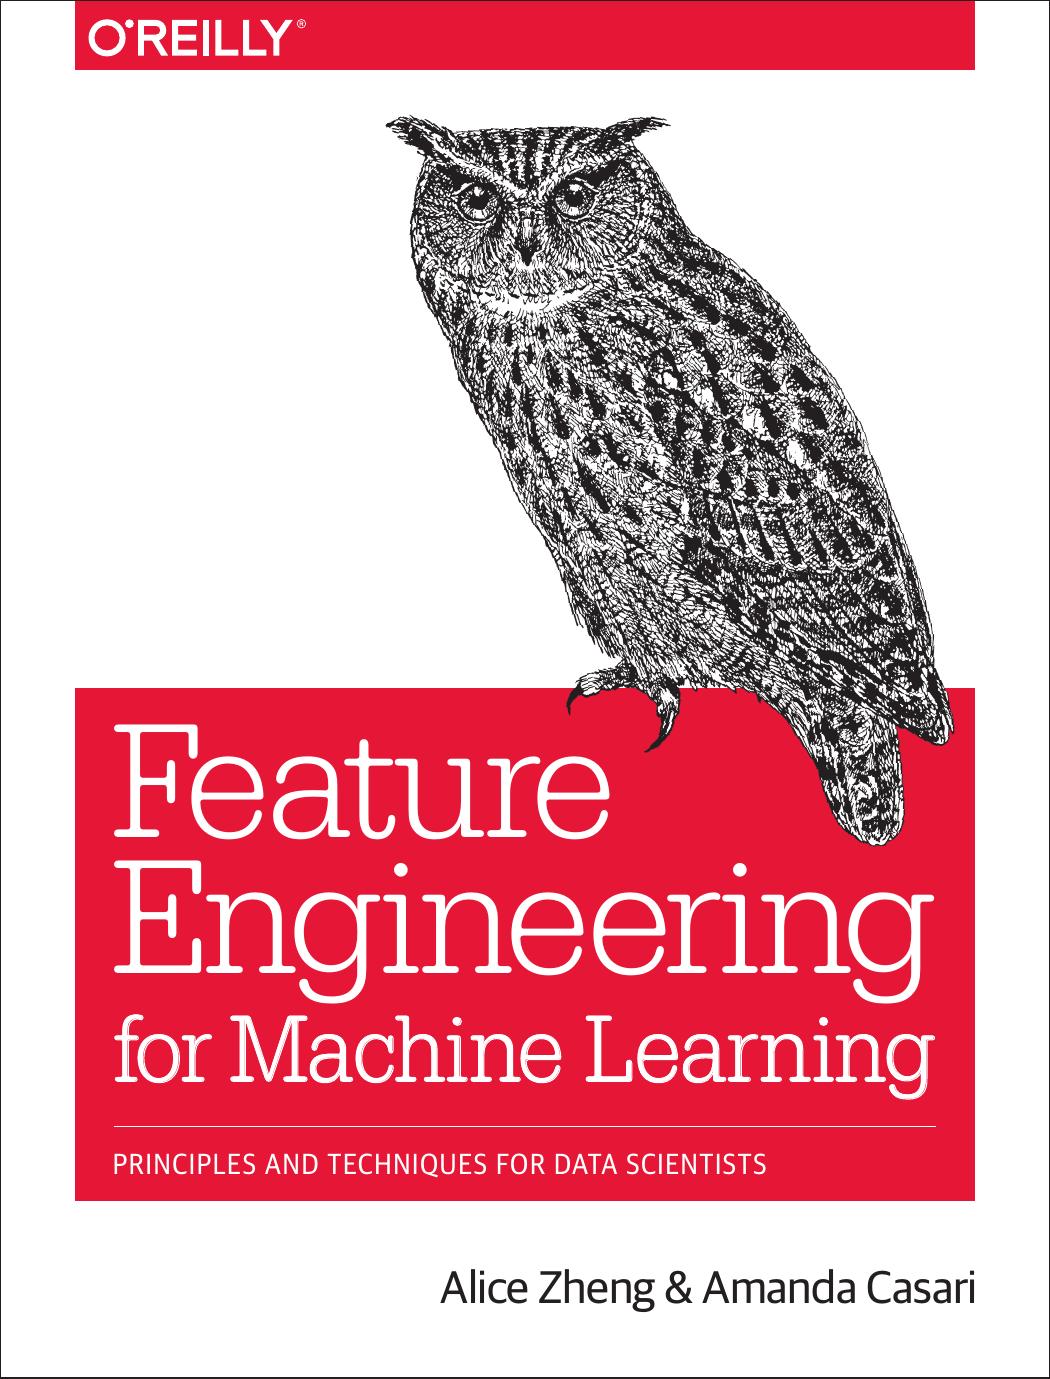 Feature Engineering for Machine Learning by Alice Zheng and Amanda Casari